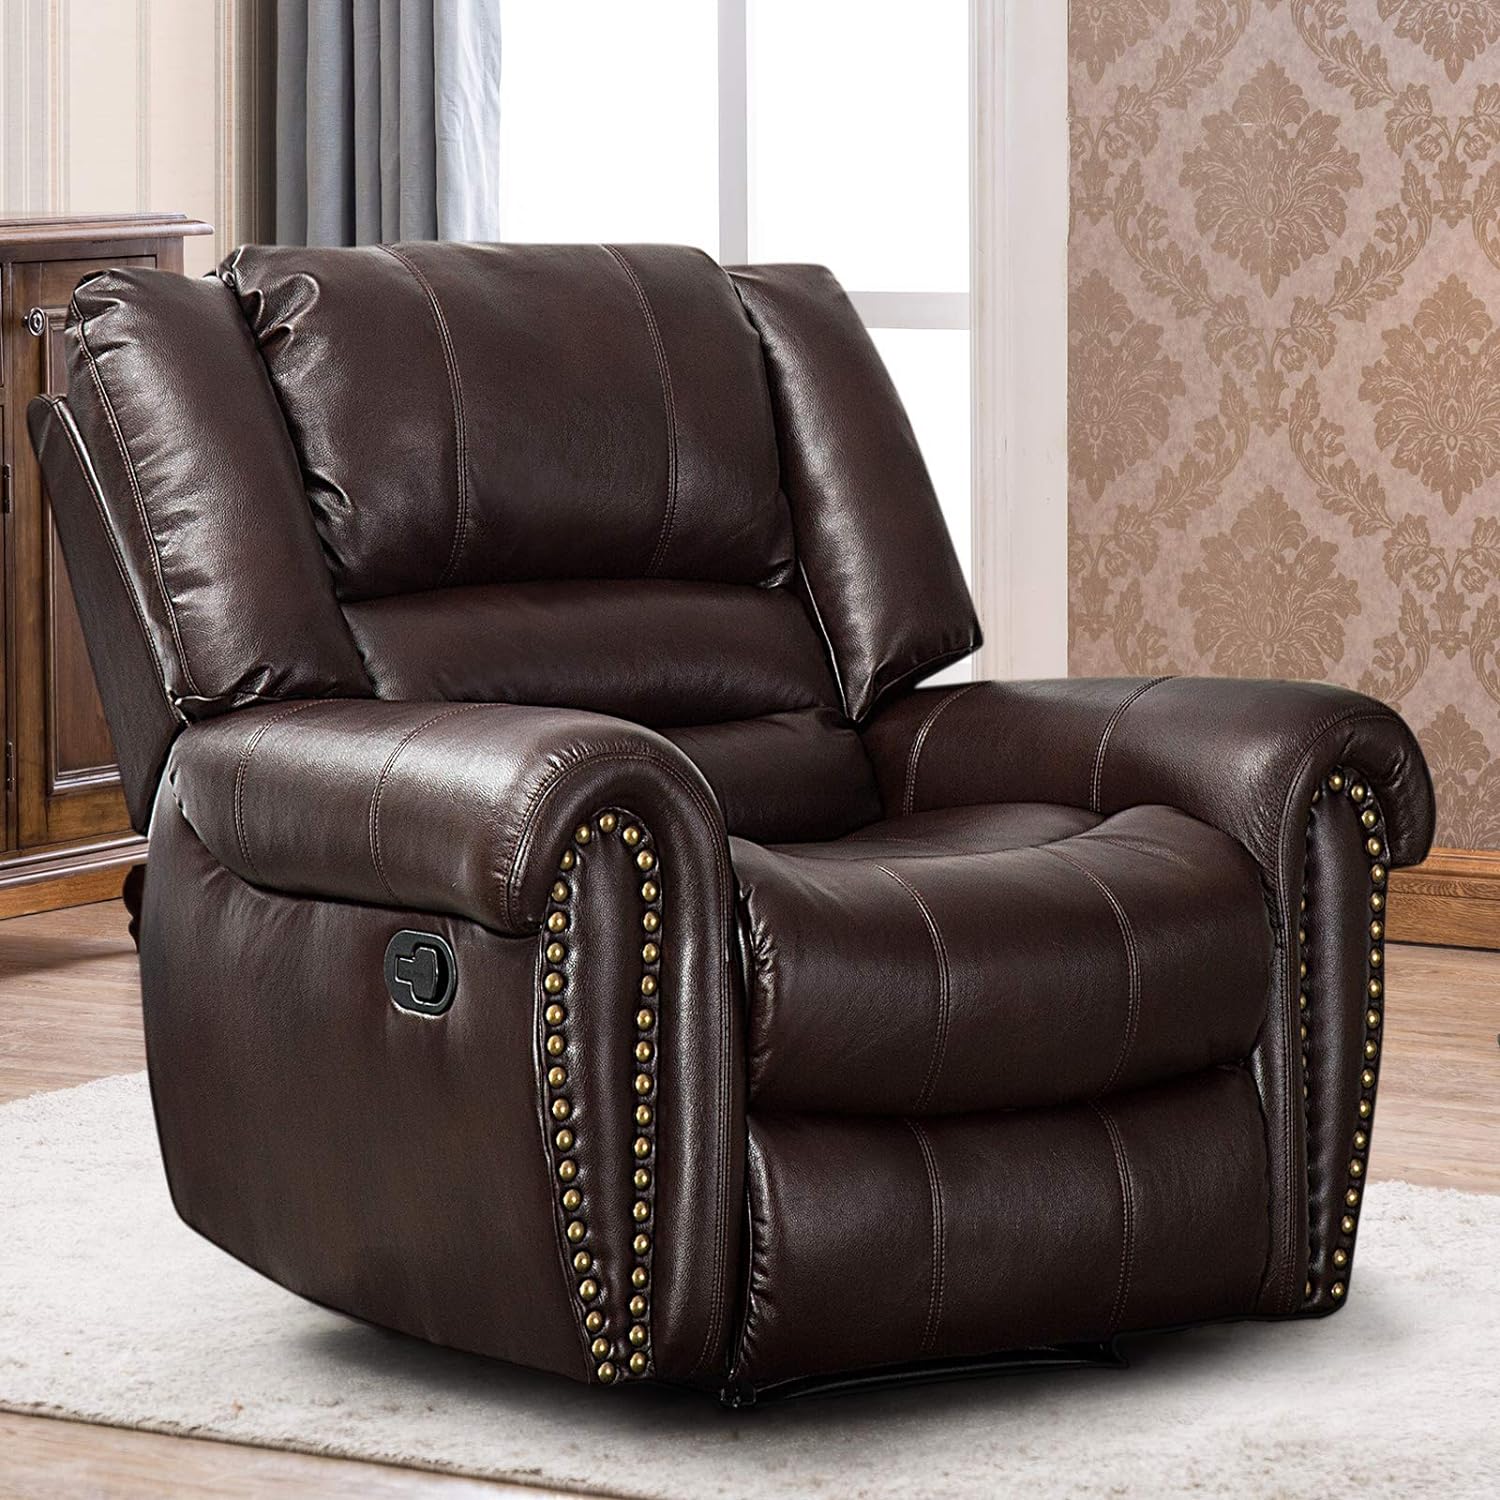 What Is Manual Recliner